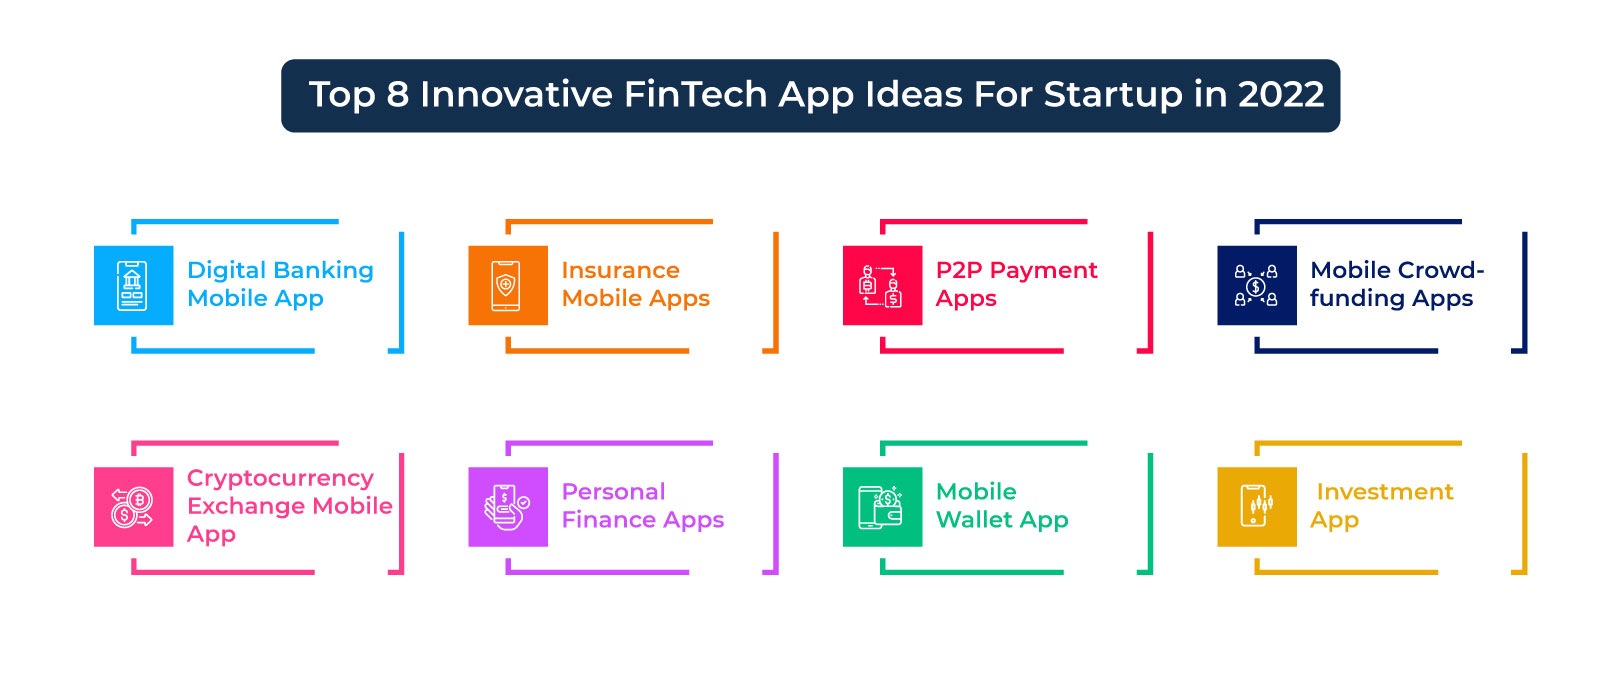 Top-8-Innovative-FinTech-App-Ideas-For-Startup-in-2022